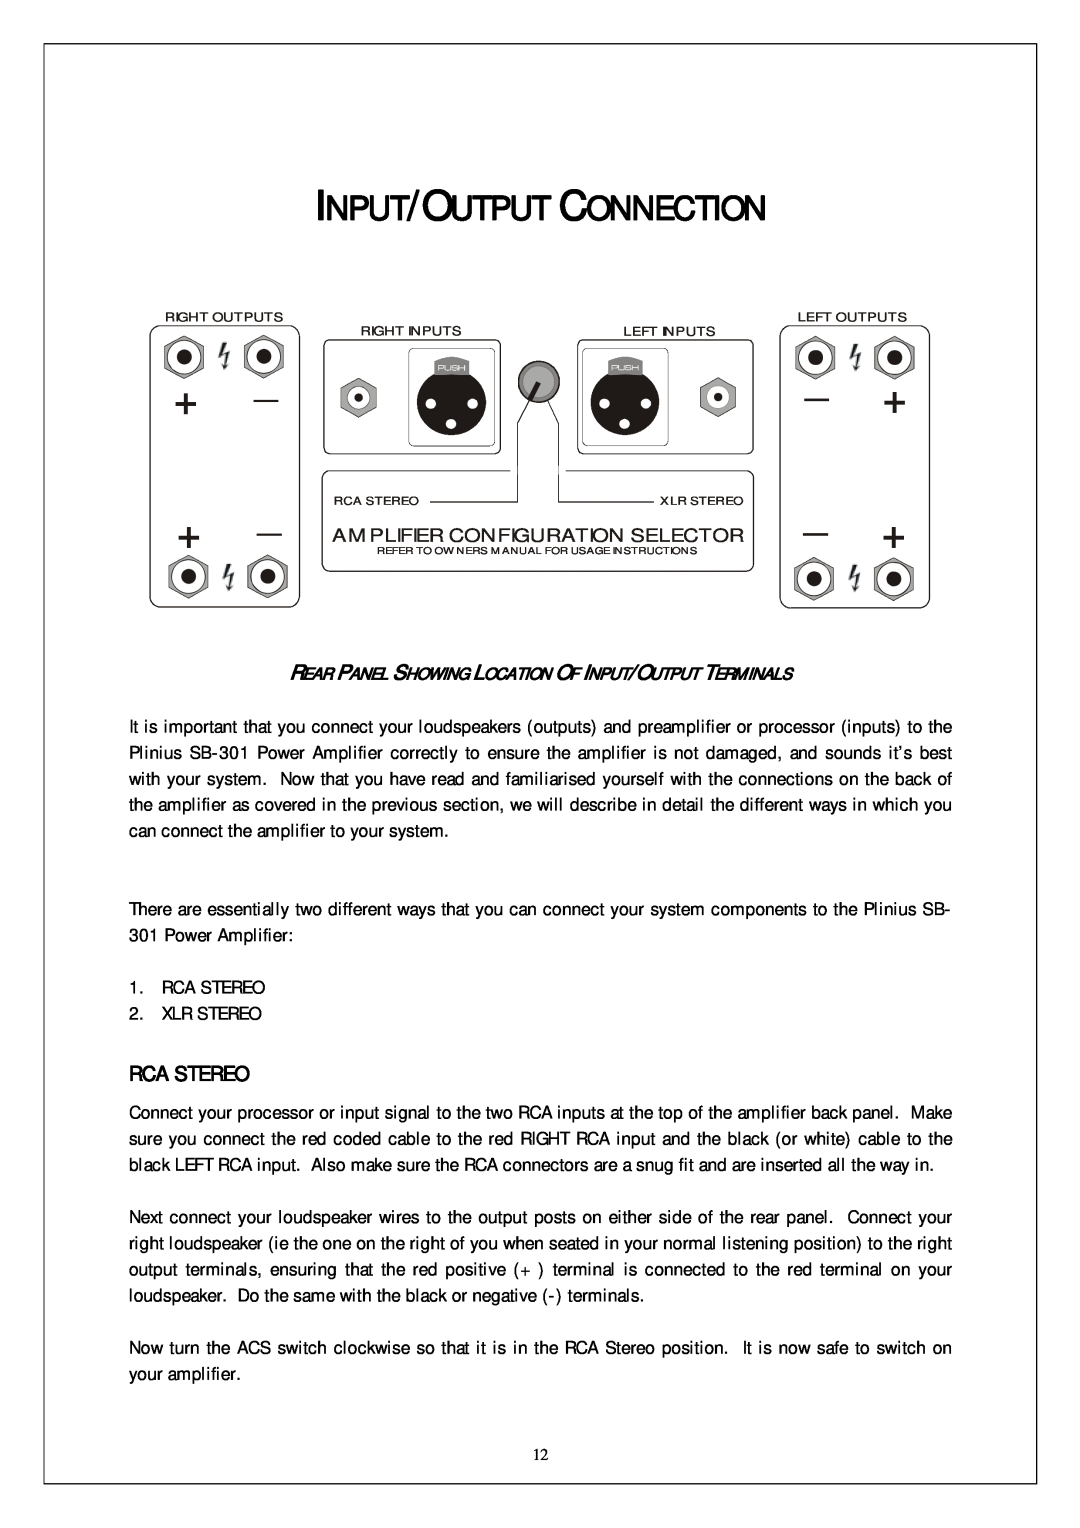 Plinius Audio SB-301 manual Input/Output Connection, Rca Stereo, Rear Panel Showing Location Of Input/Output Terminals 